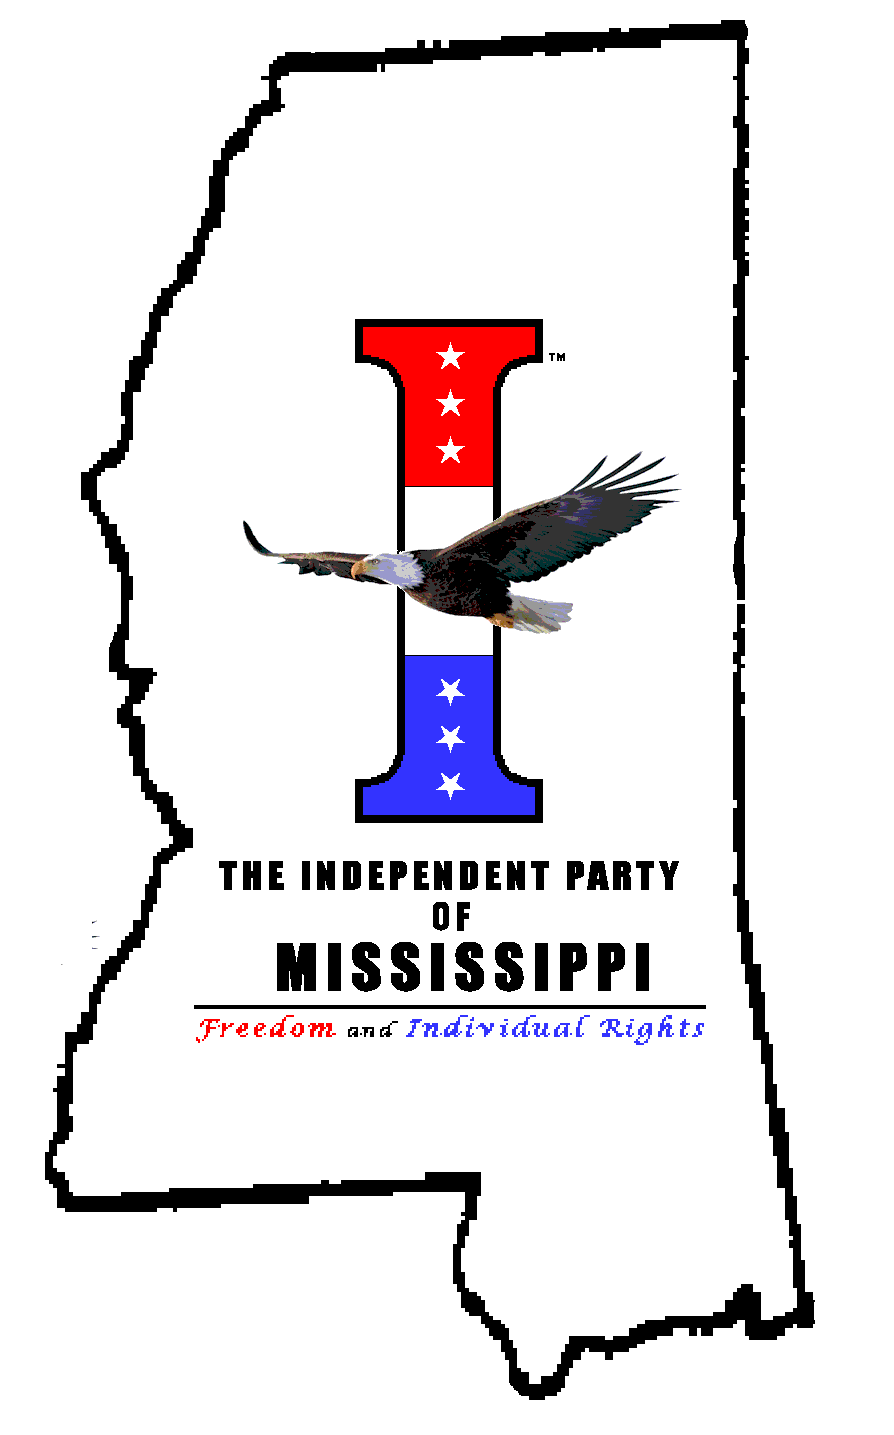 The Independent Party of Mississippi!